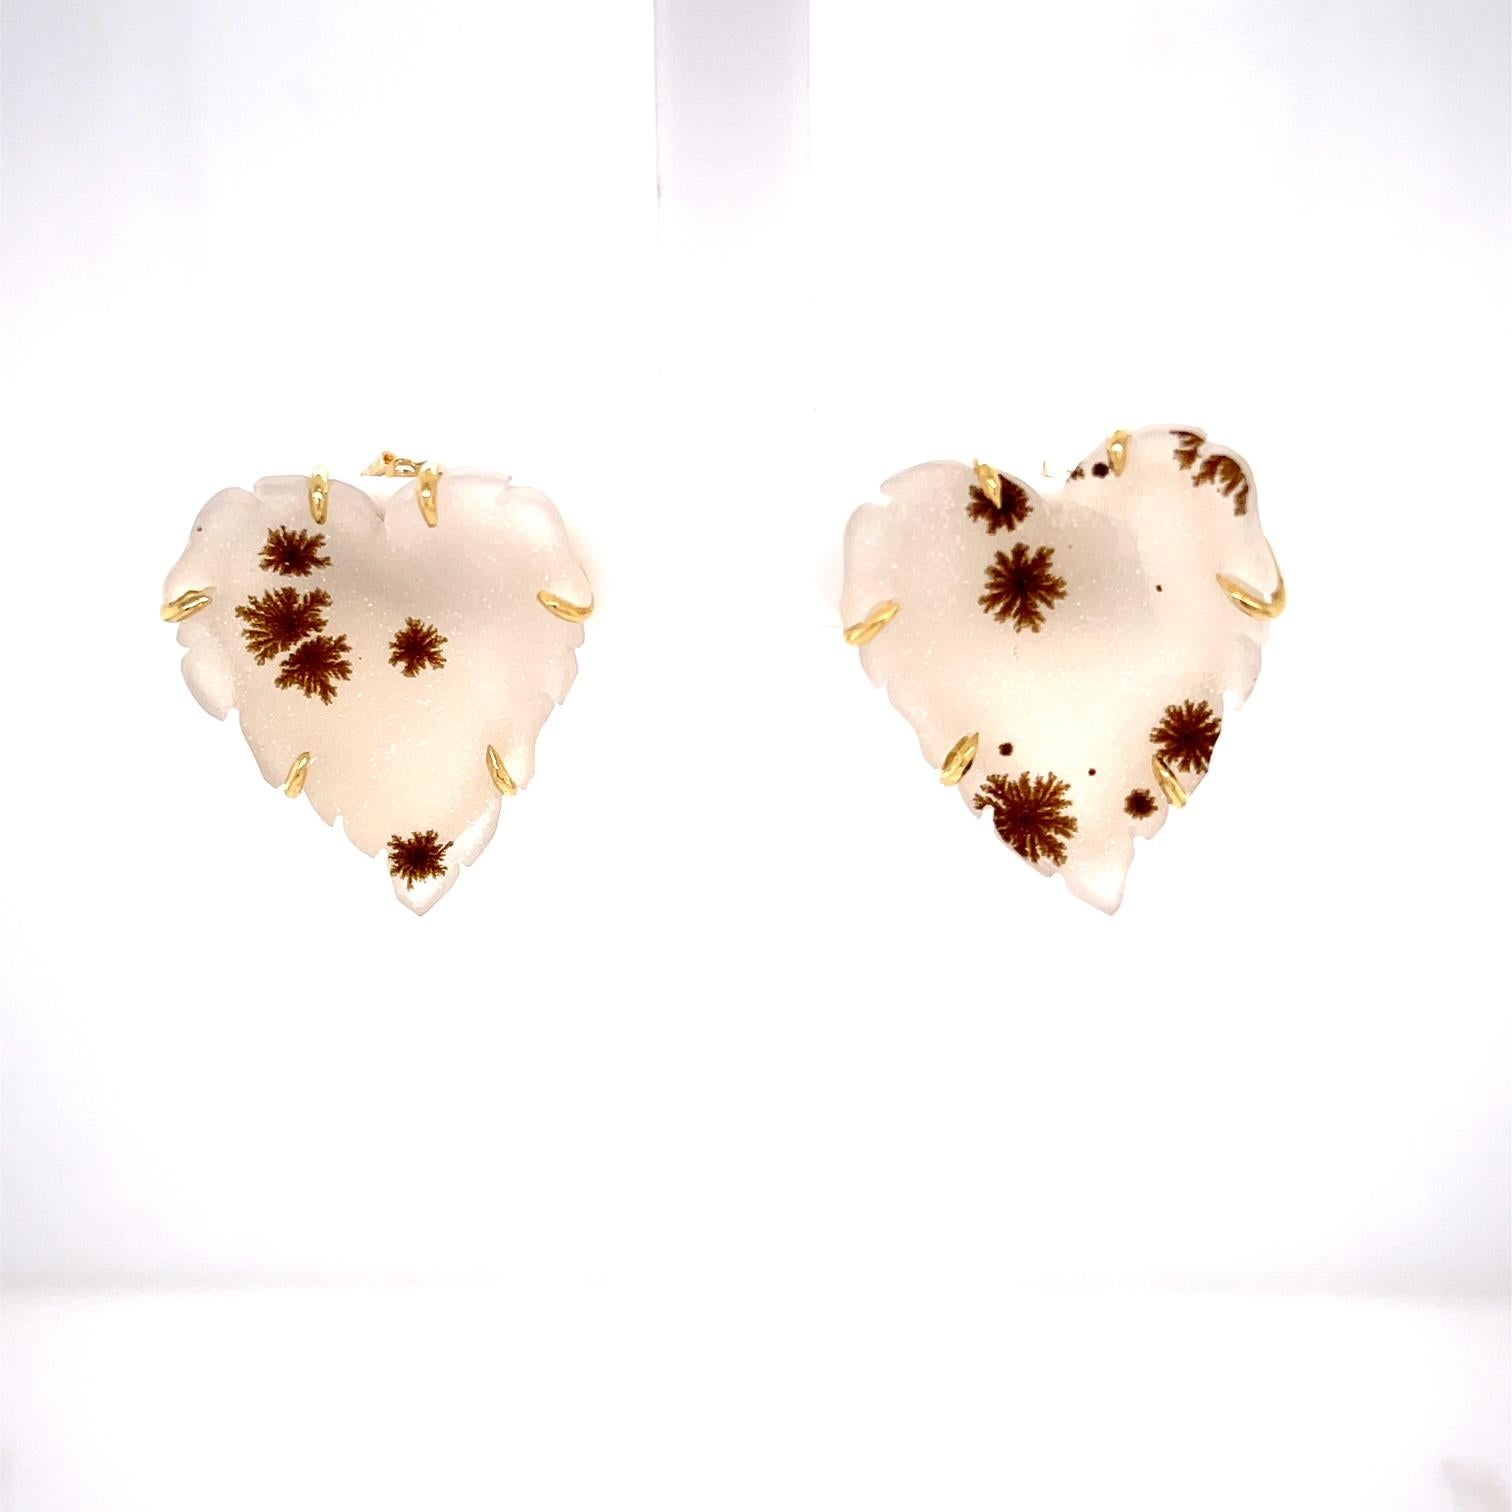 A pair of 18k yellow gold carved white and speckled druzy heart studs. These studs were made and designed by llyn strong.